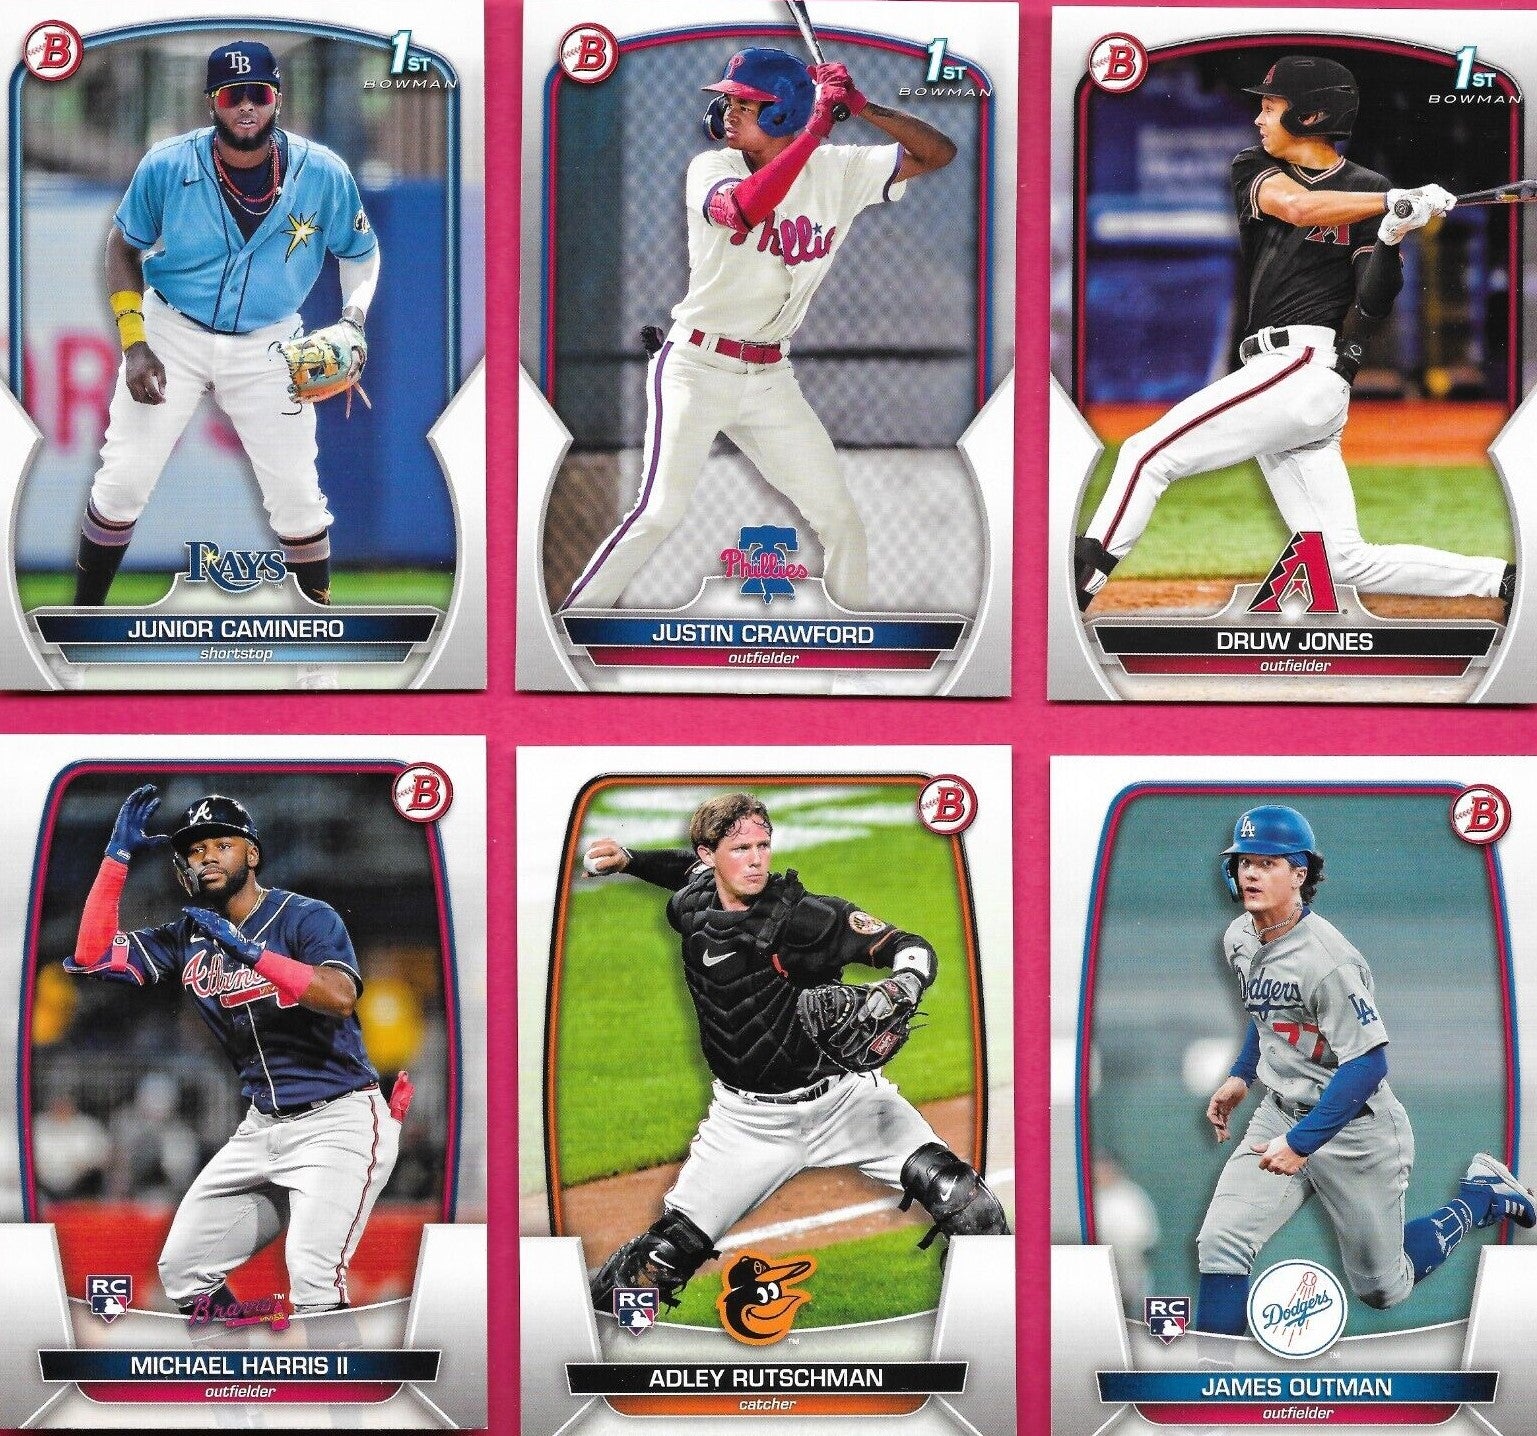 Aaron Judge Rookie Cards and Prospect Cards